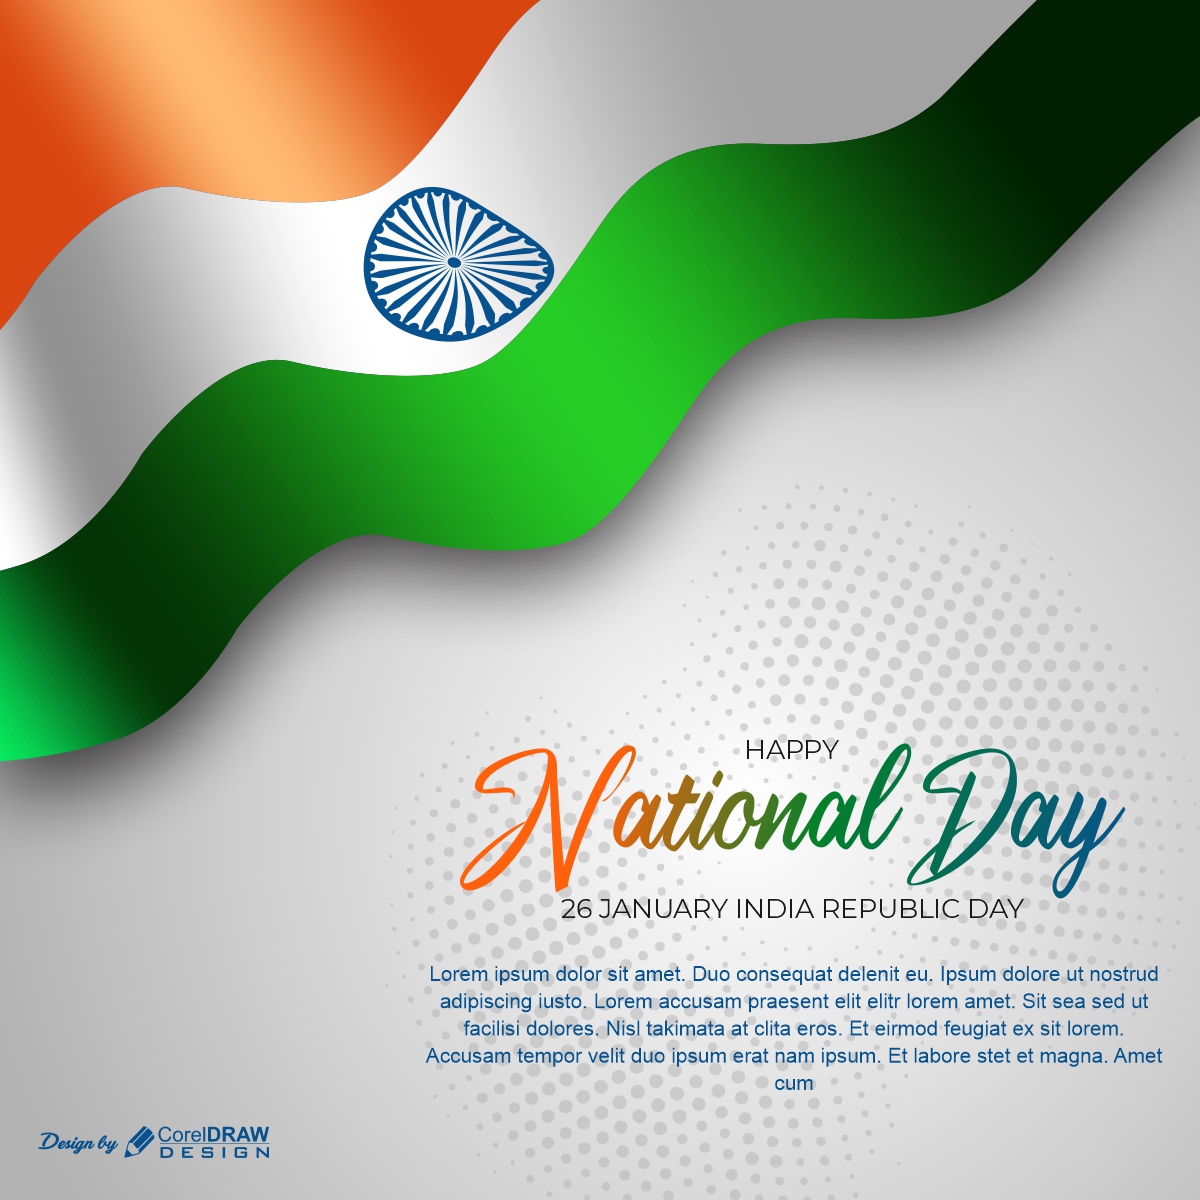 Download Awesome Indian Flag Design For Happy Republic Day Vector ...